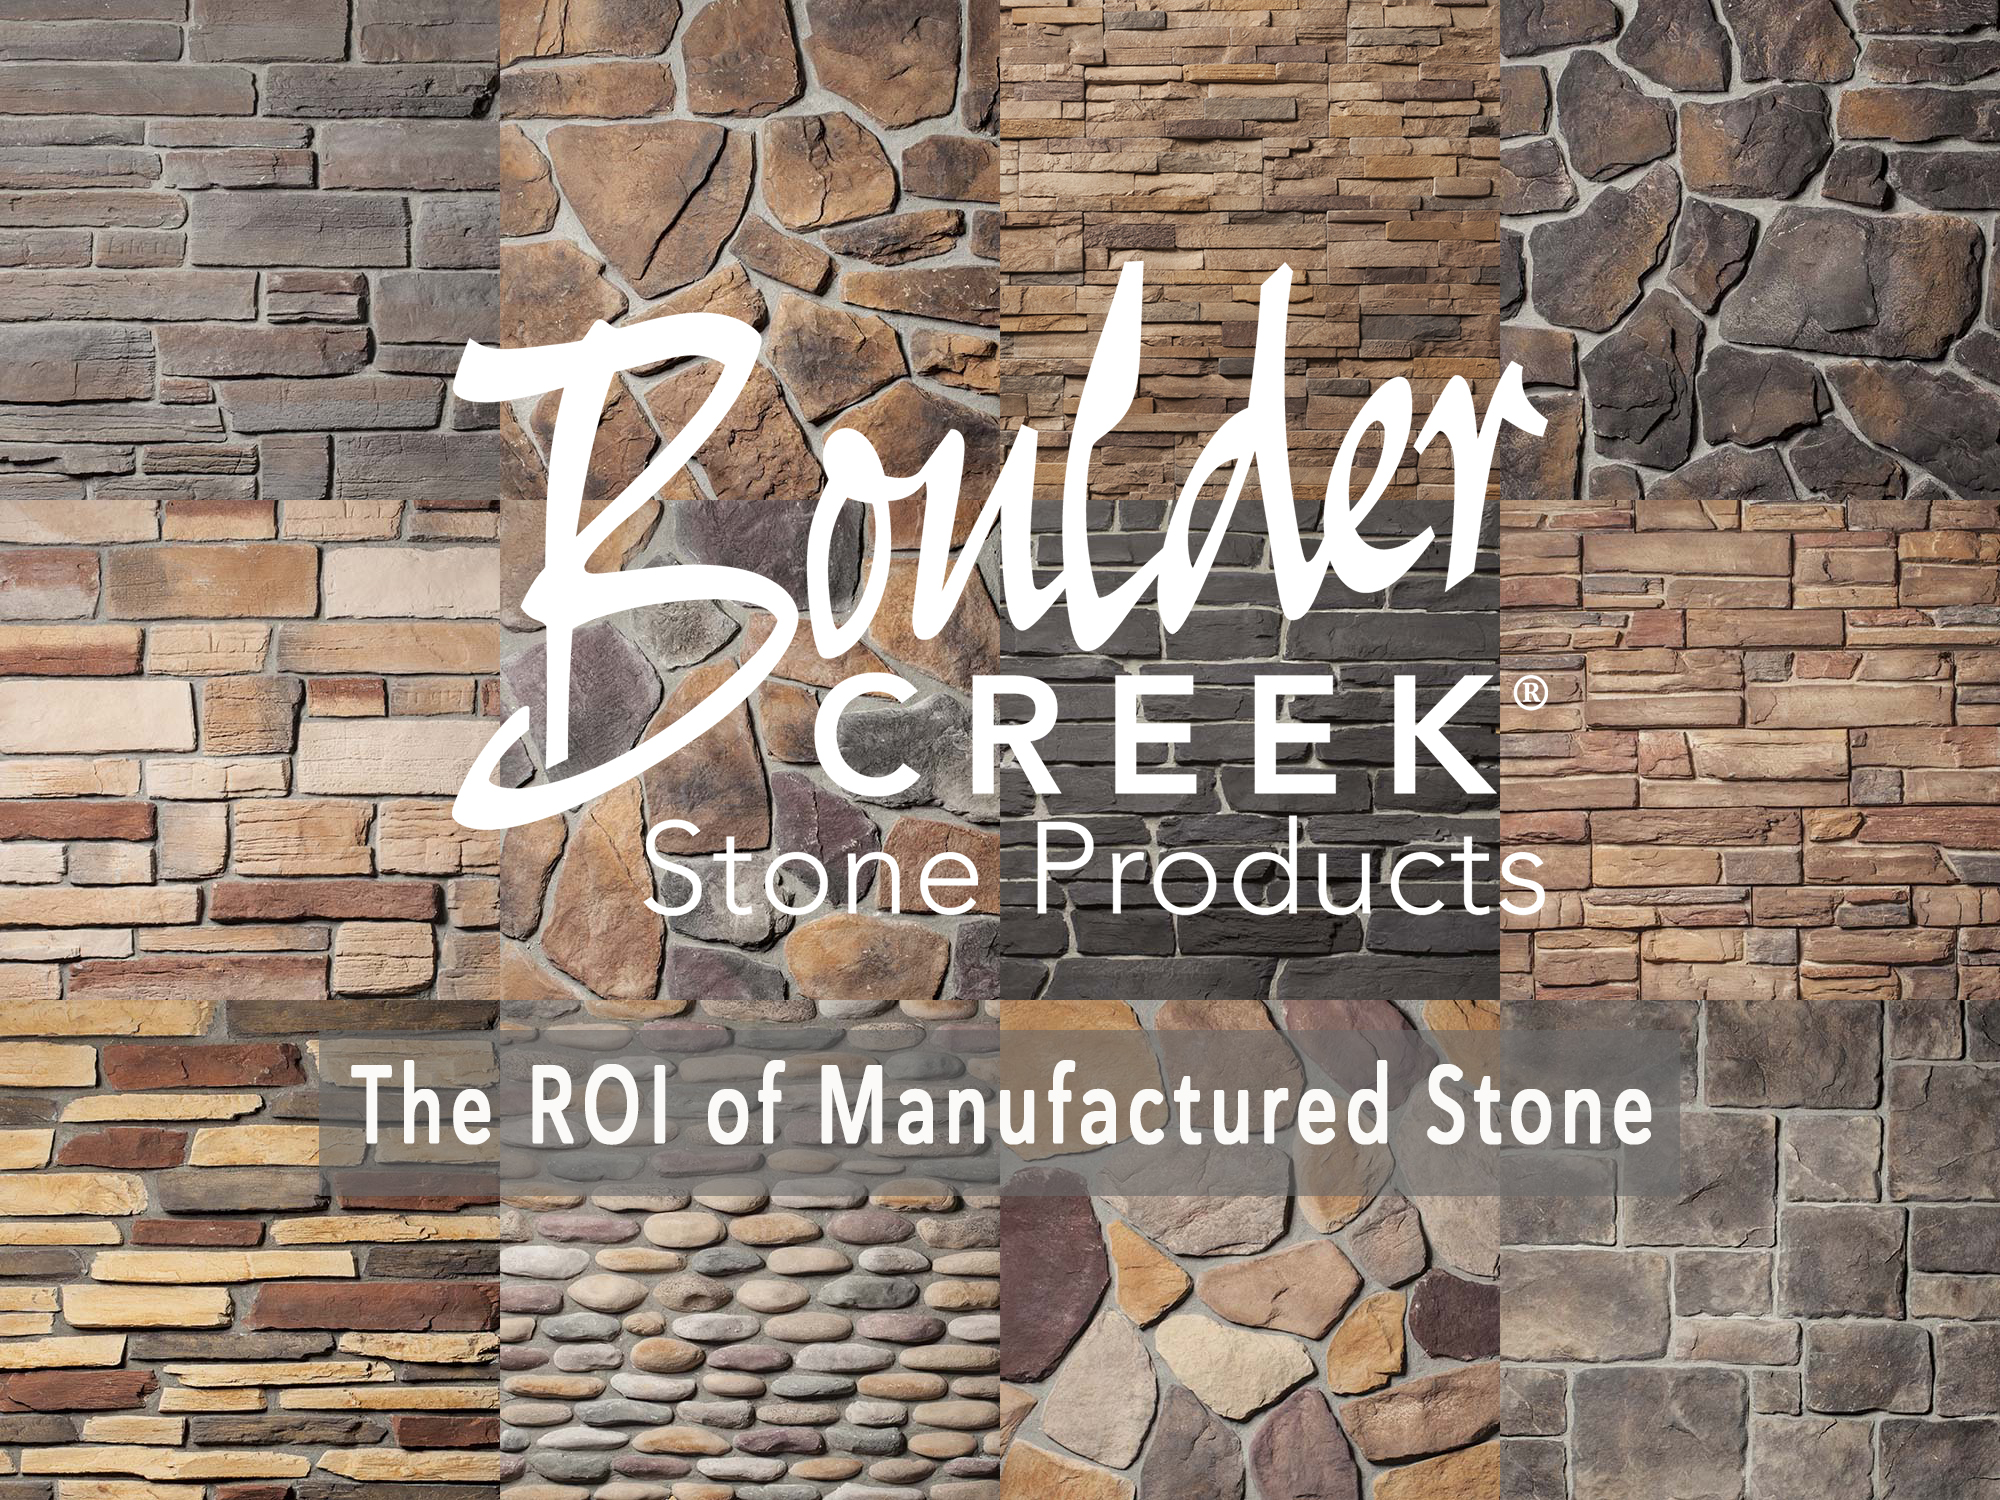 Boulder Creek Stone Products: The ROI of Manufactured Stone